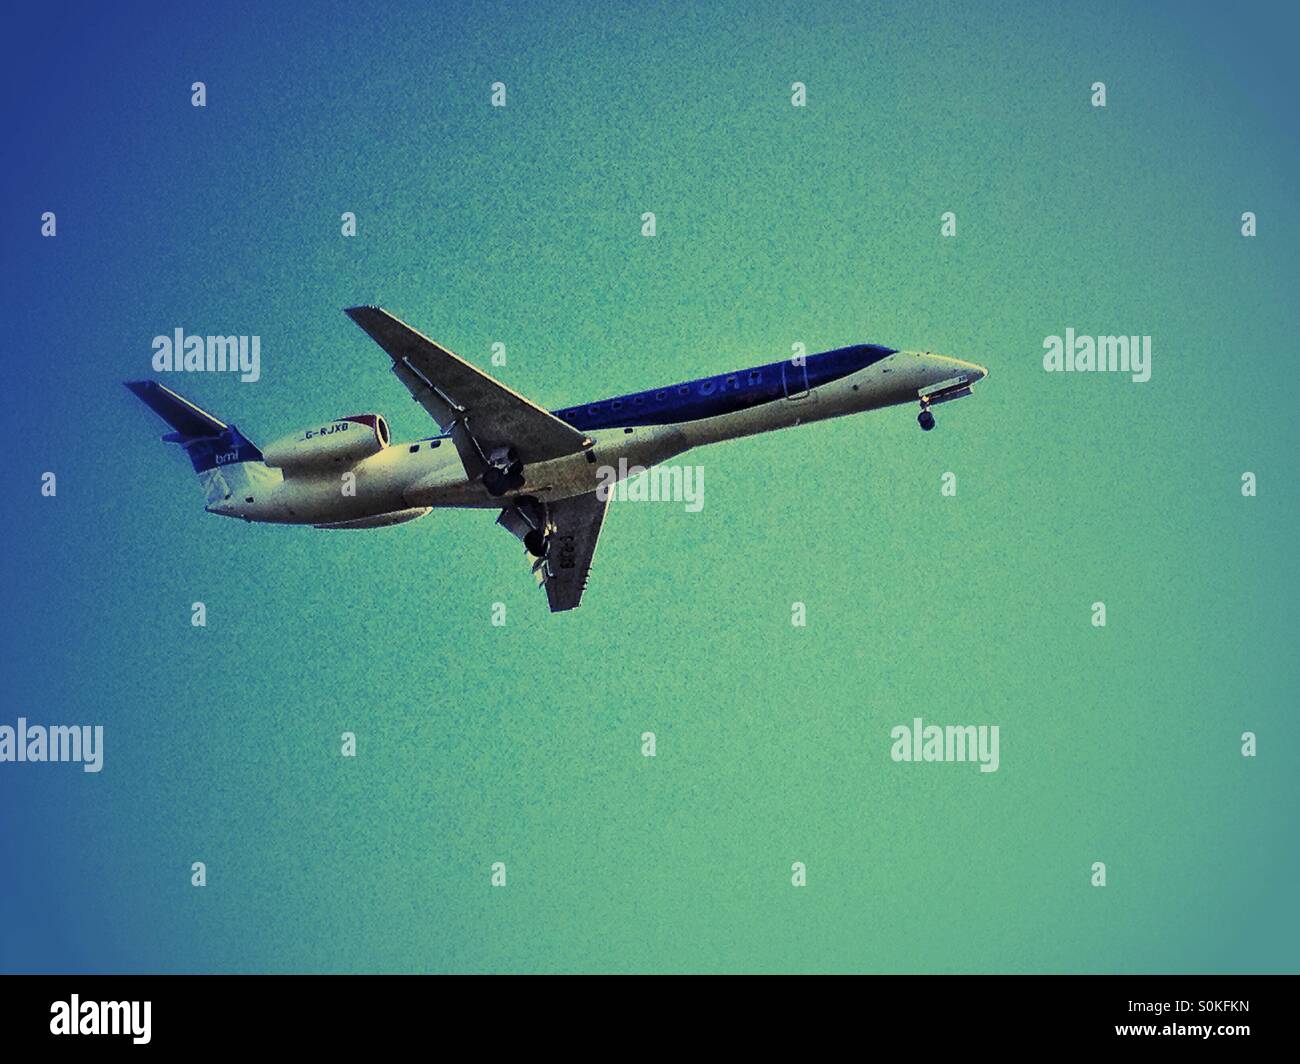 Jet airliner on landing approach Stock Photo